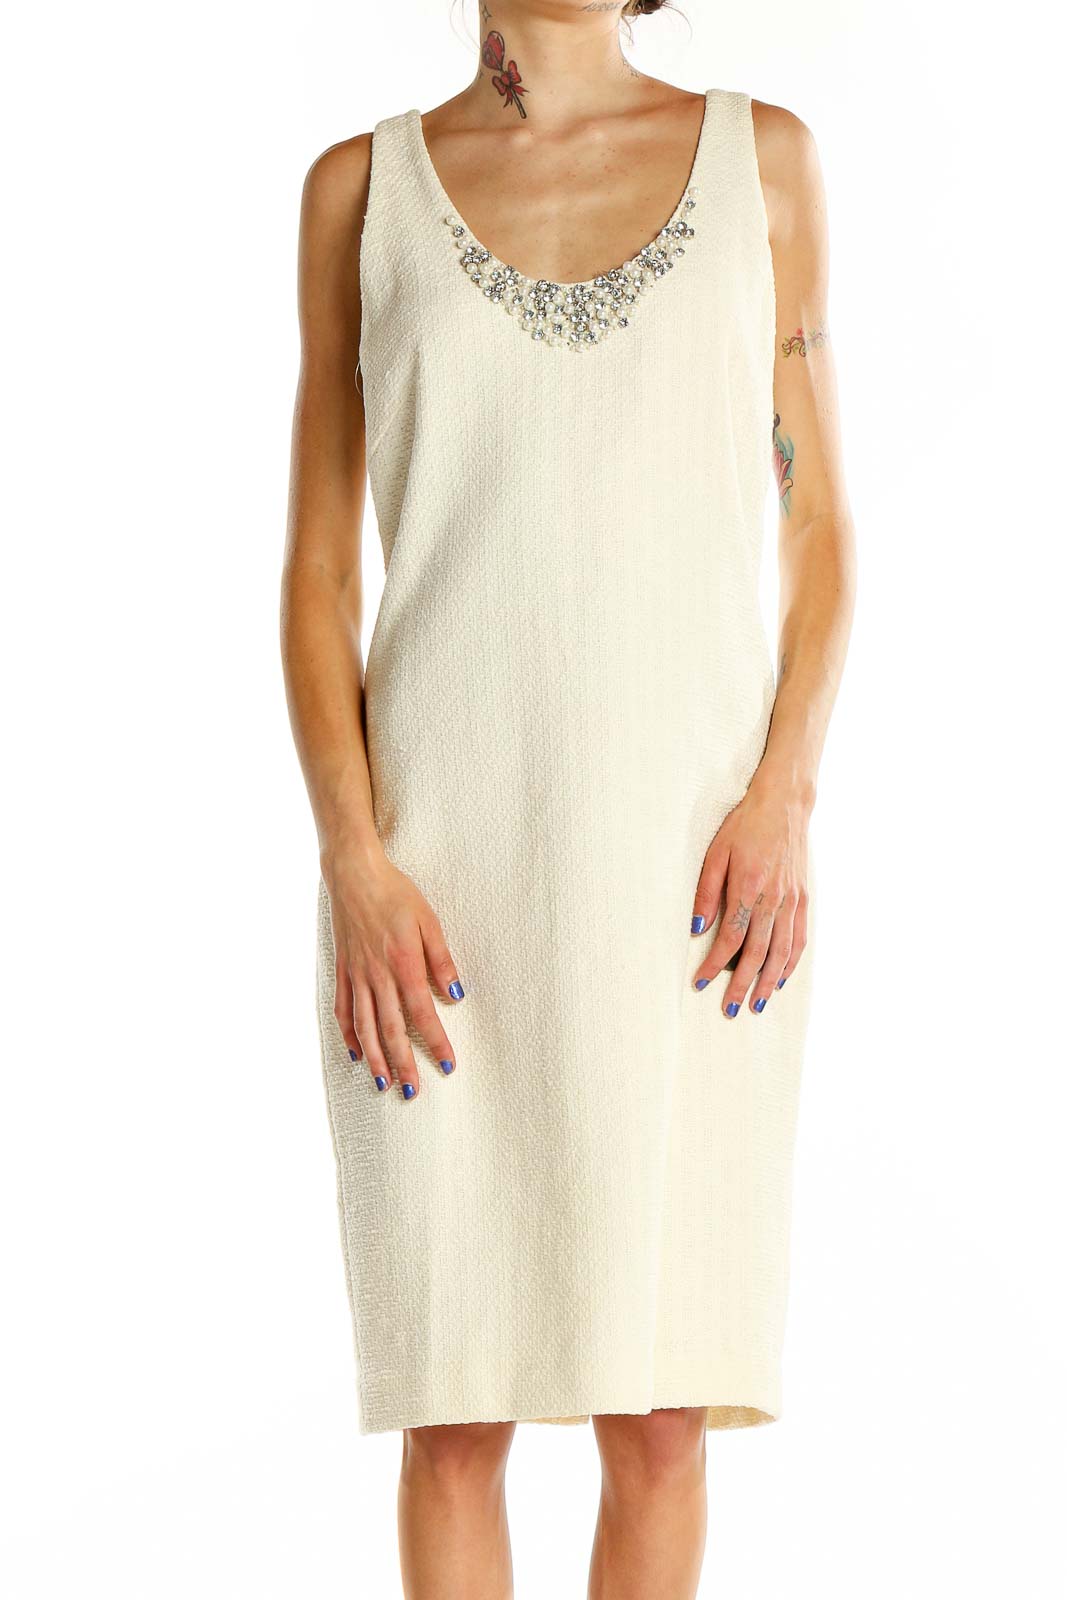 White Tweed Bedazzled Sheath Dress Front